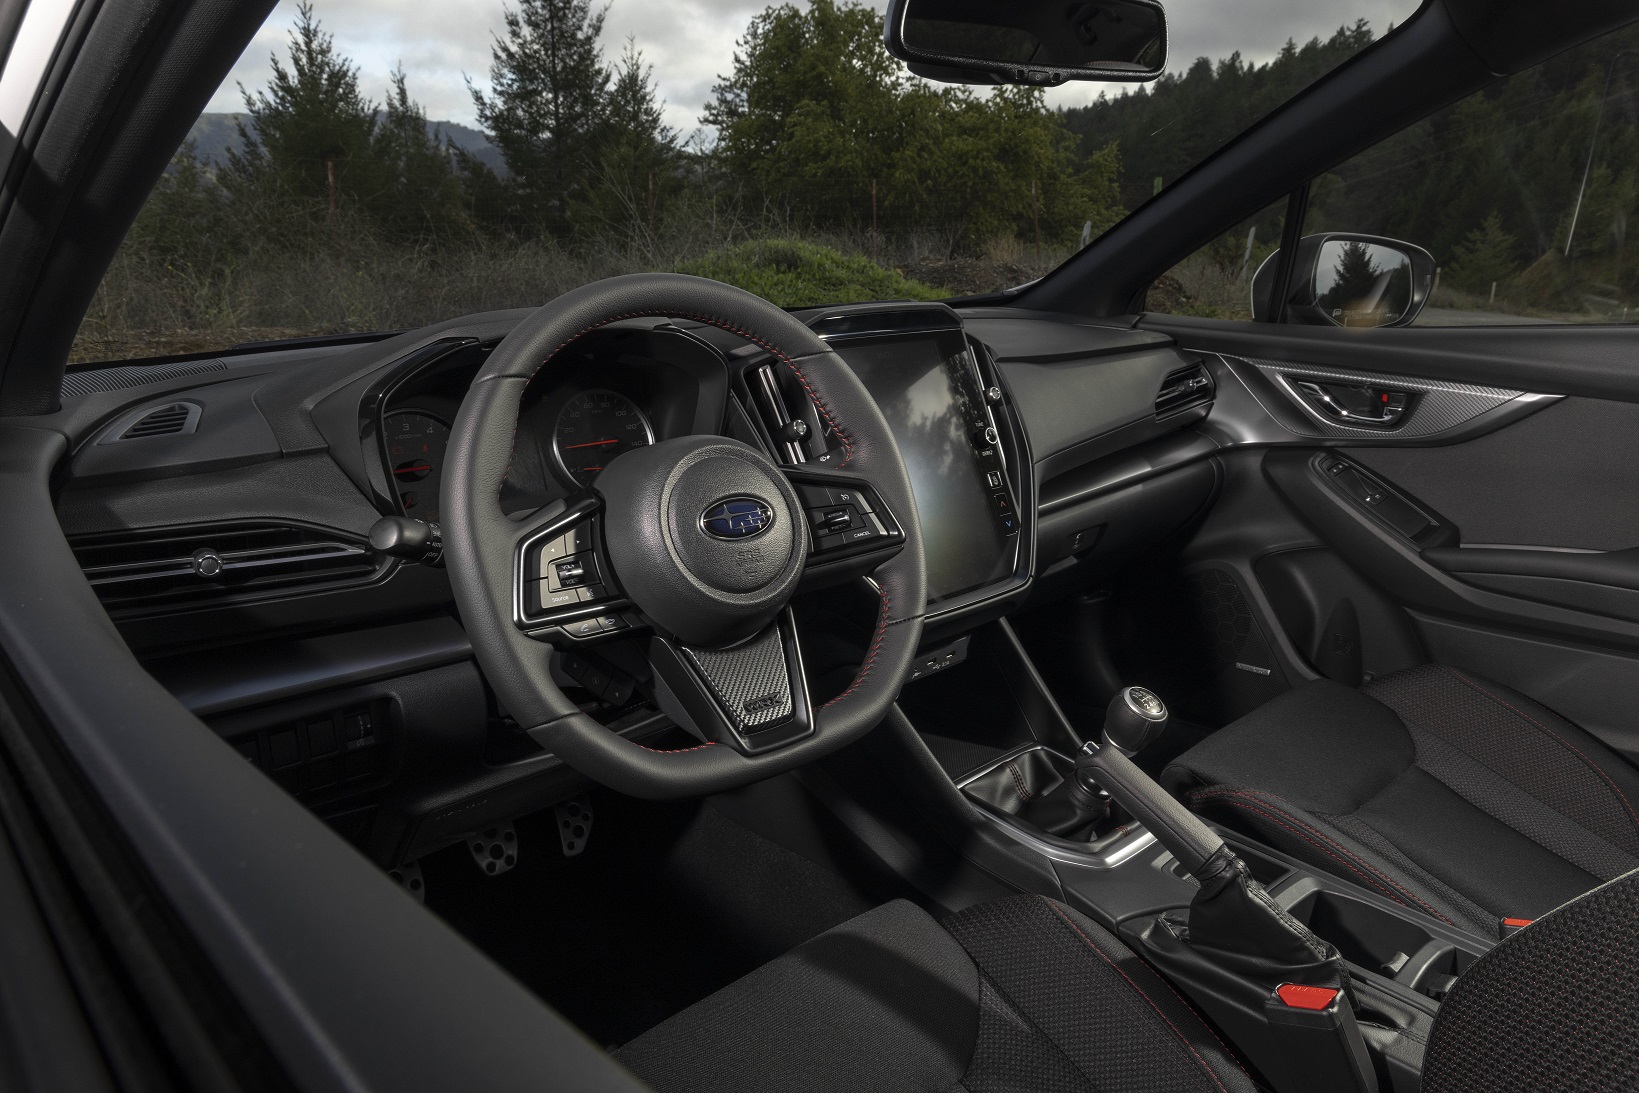 The driver area of the 2022 WRX